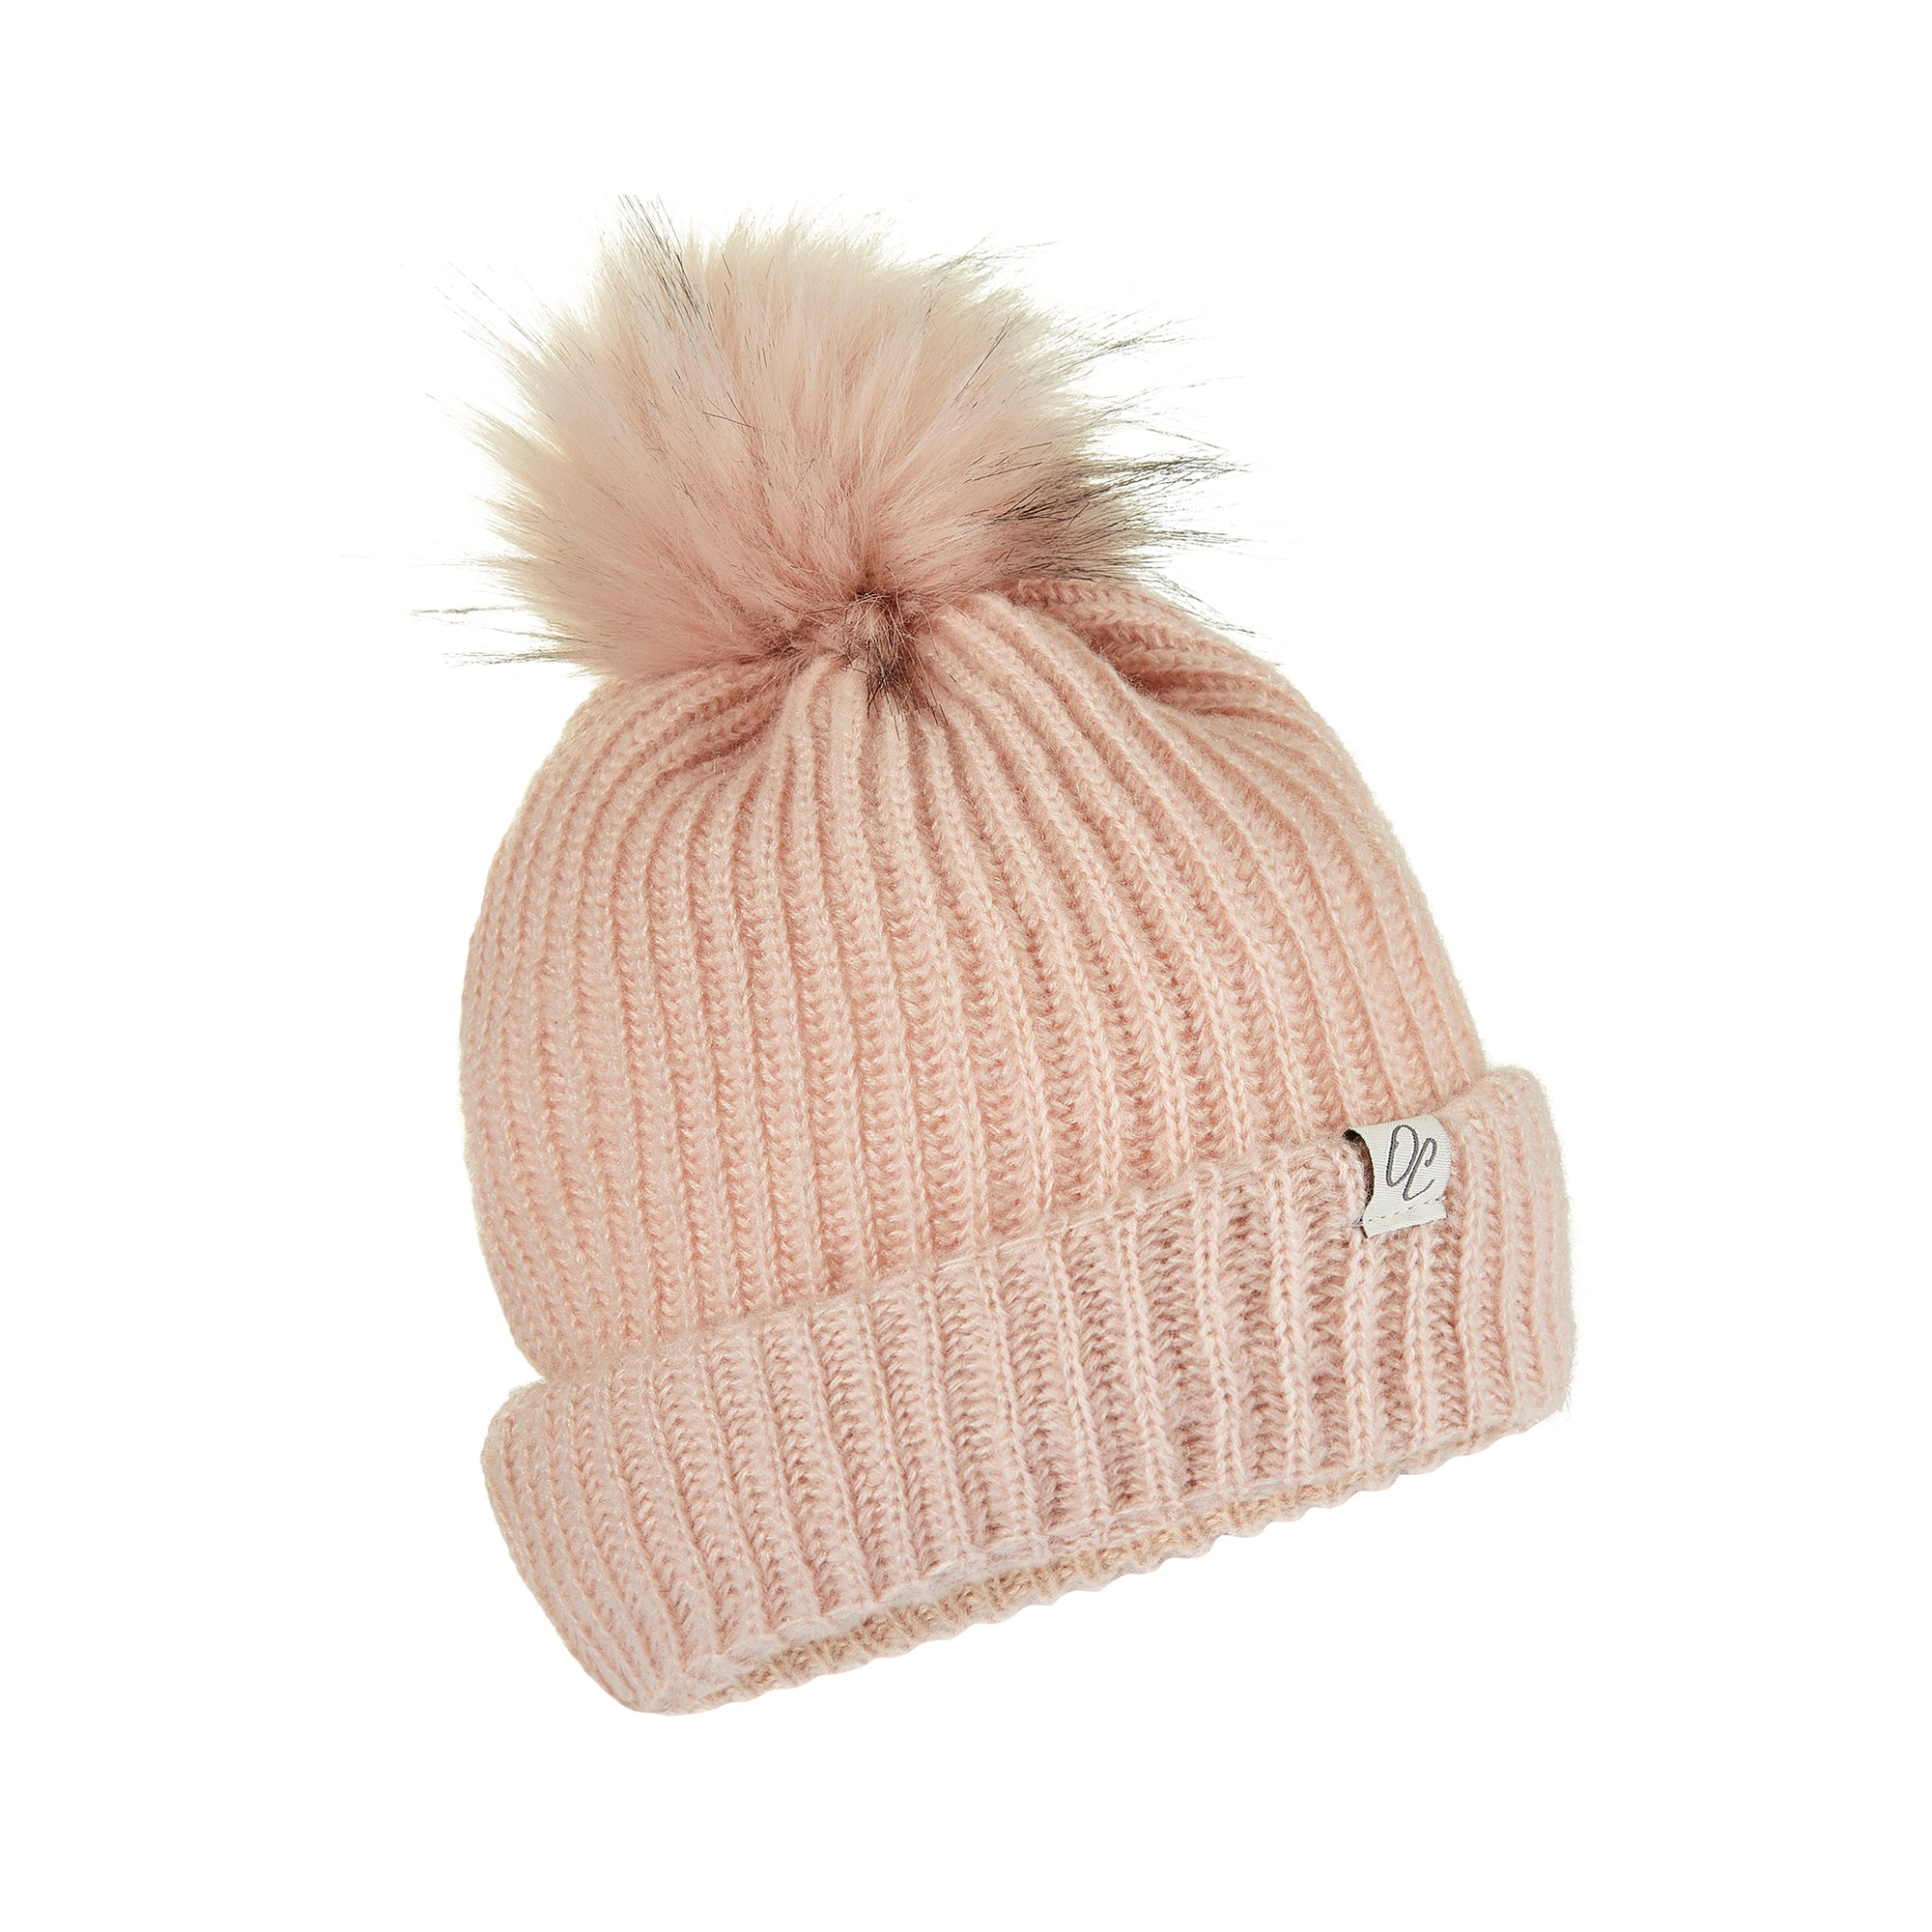 Only Curls Pink Satin Lined Knitted Beanie Hat with pom pom and showing the lining